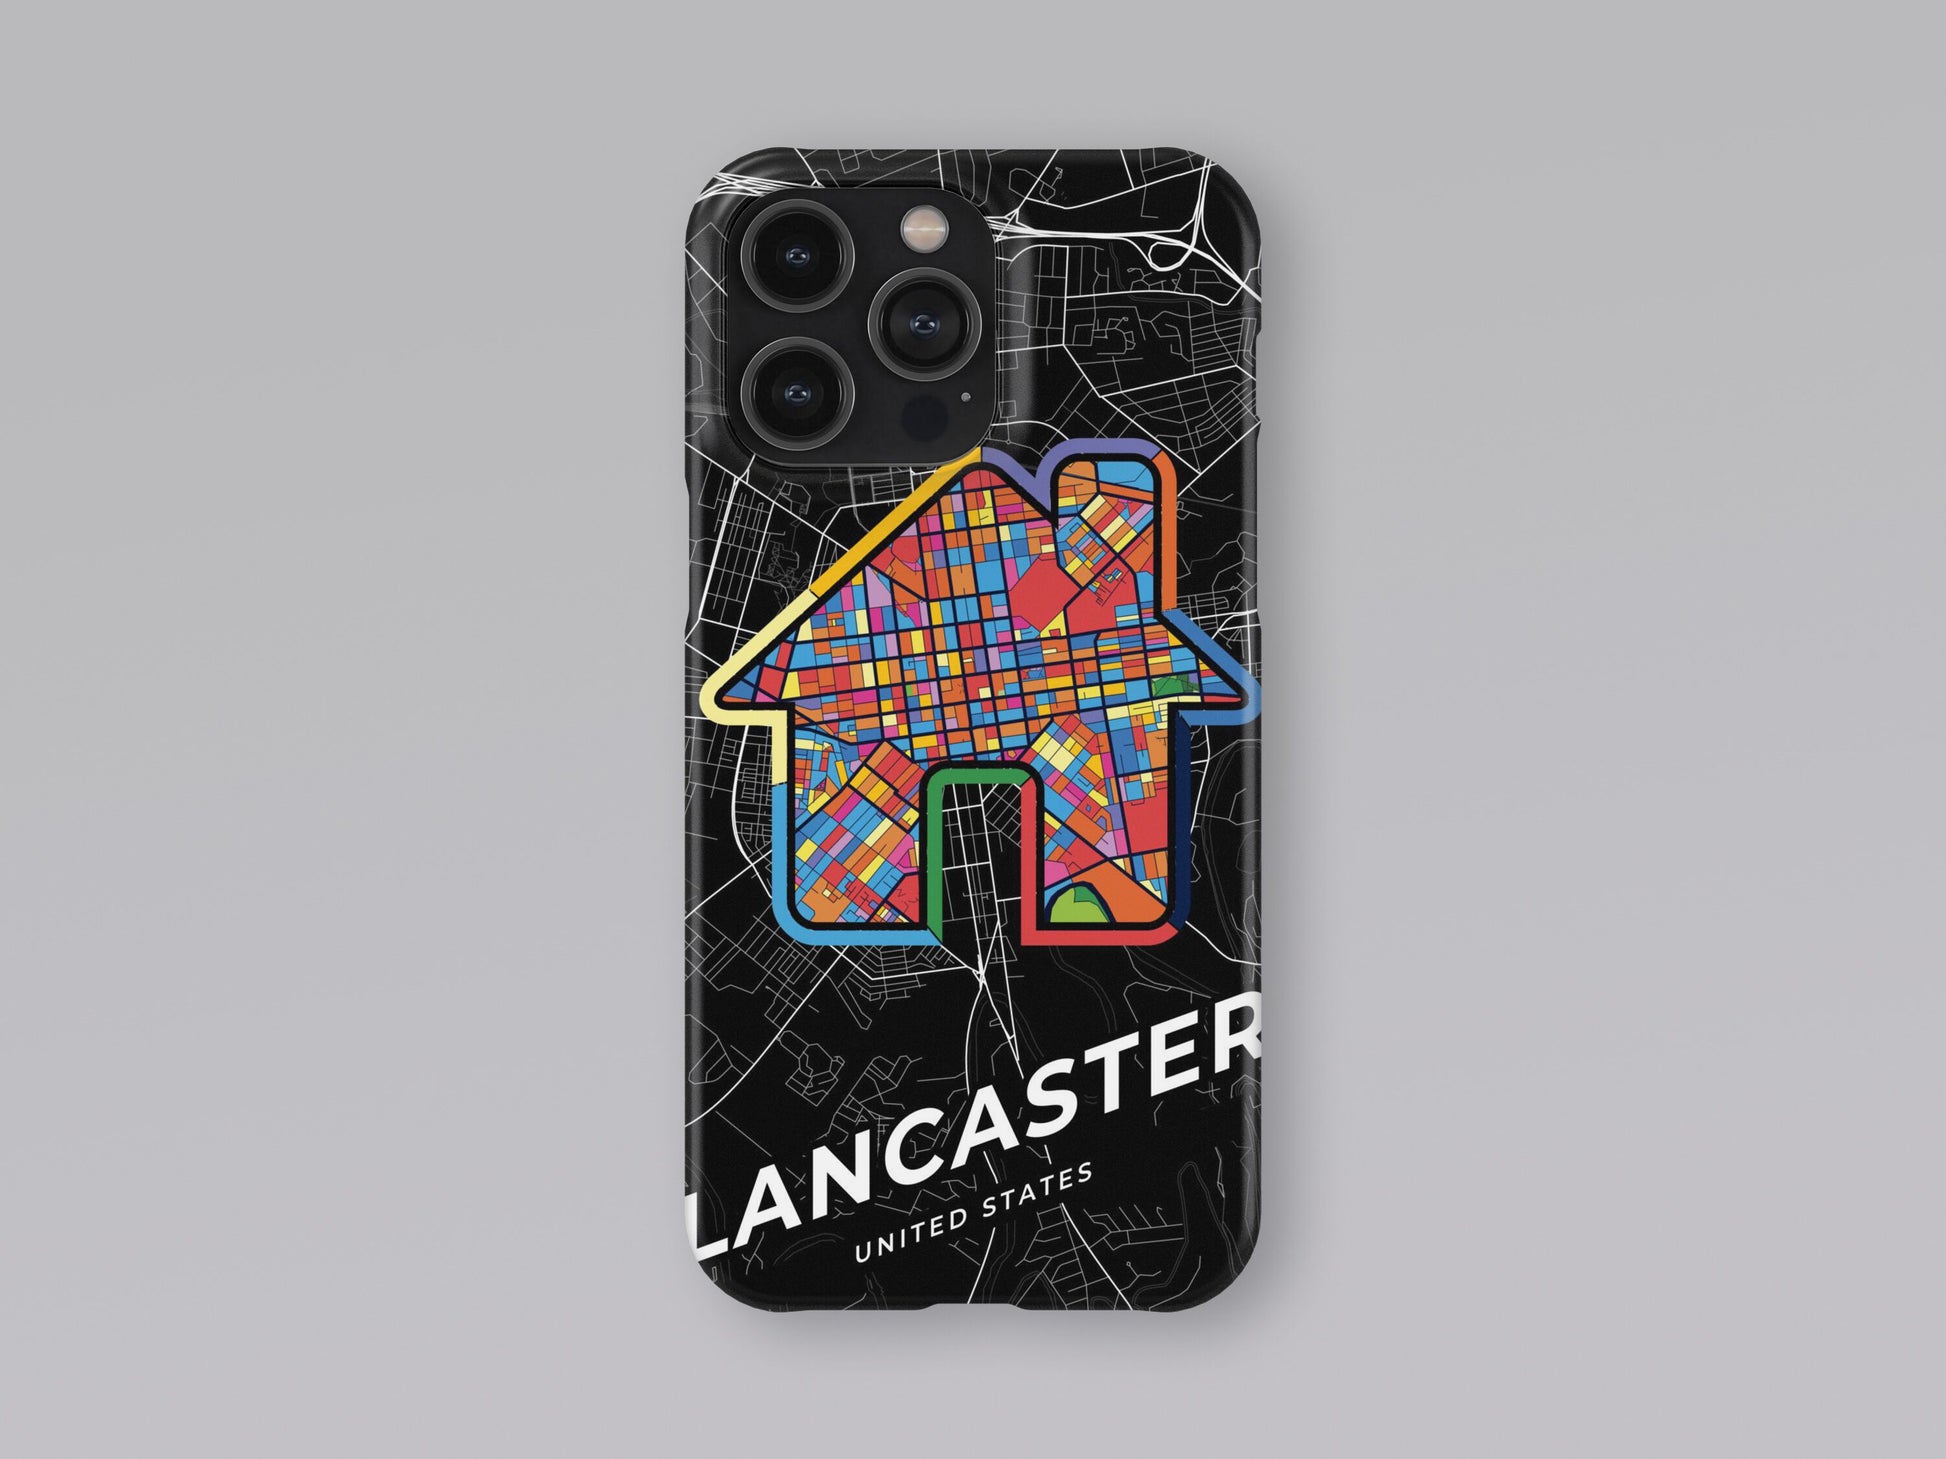 Lancaster Pennsylvania slim phone case with colorful icon. Birthday, wedding or housewarming gift. Couple match cases. 3